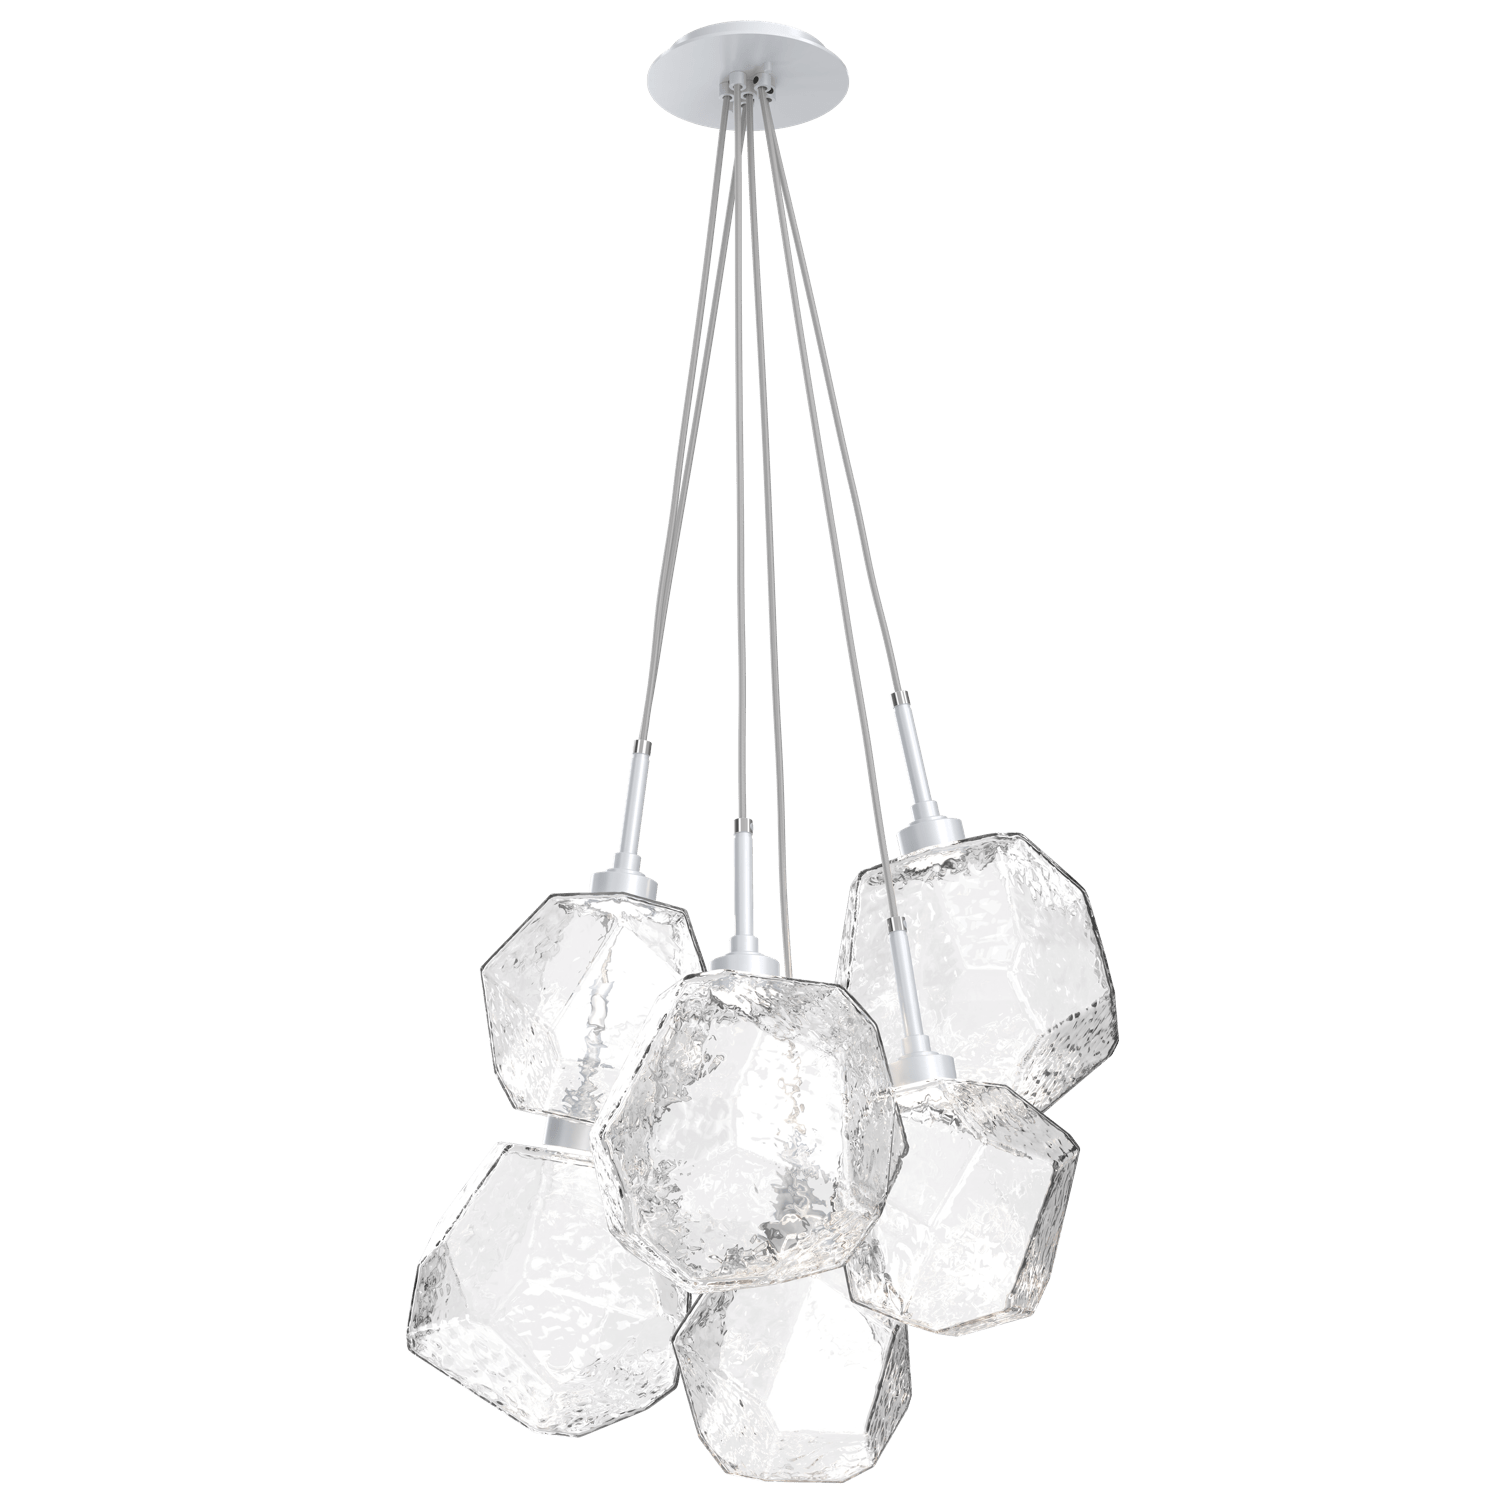 CHB0039-0F-CS-C-Hammerton-Studio-Gem-6-light-cluster-pendant-light-with-classic-silver-finish-and-clear-blown-glass-shades-and-LED-lamping